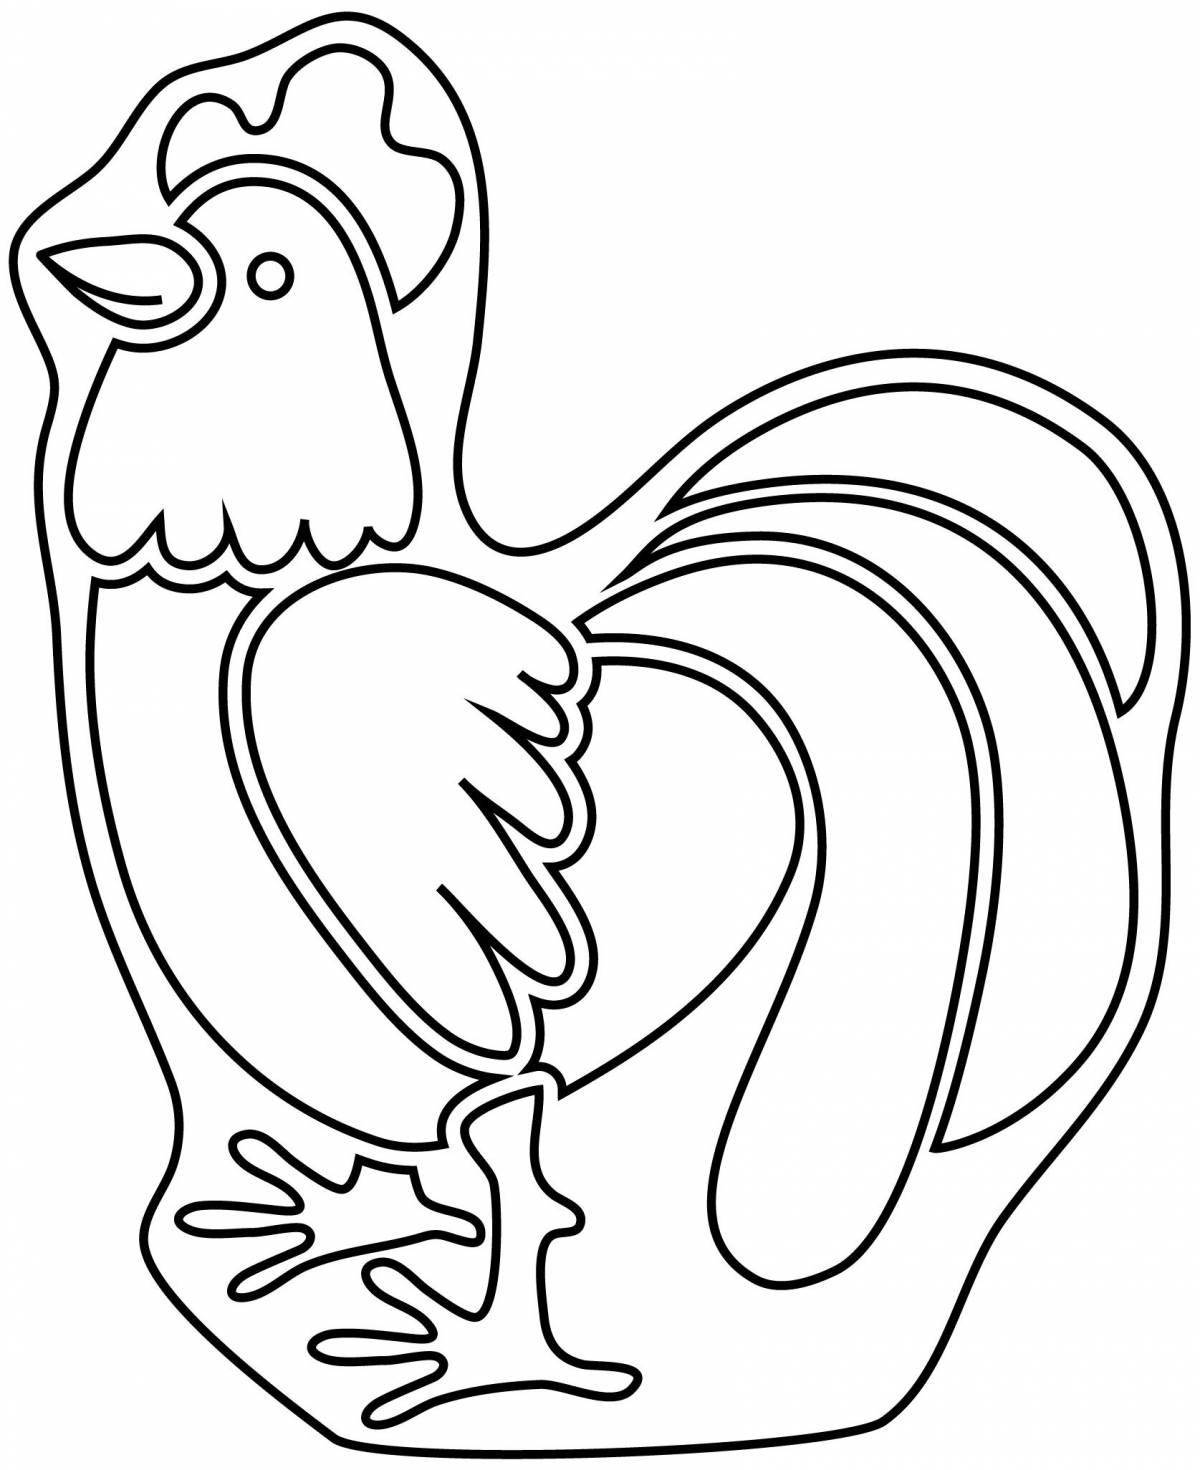 Coloring book magic rooster for children 4-5 years old